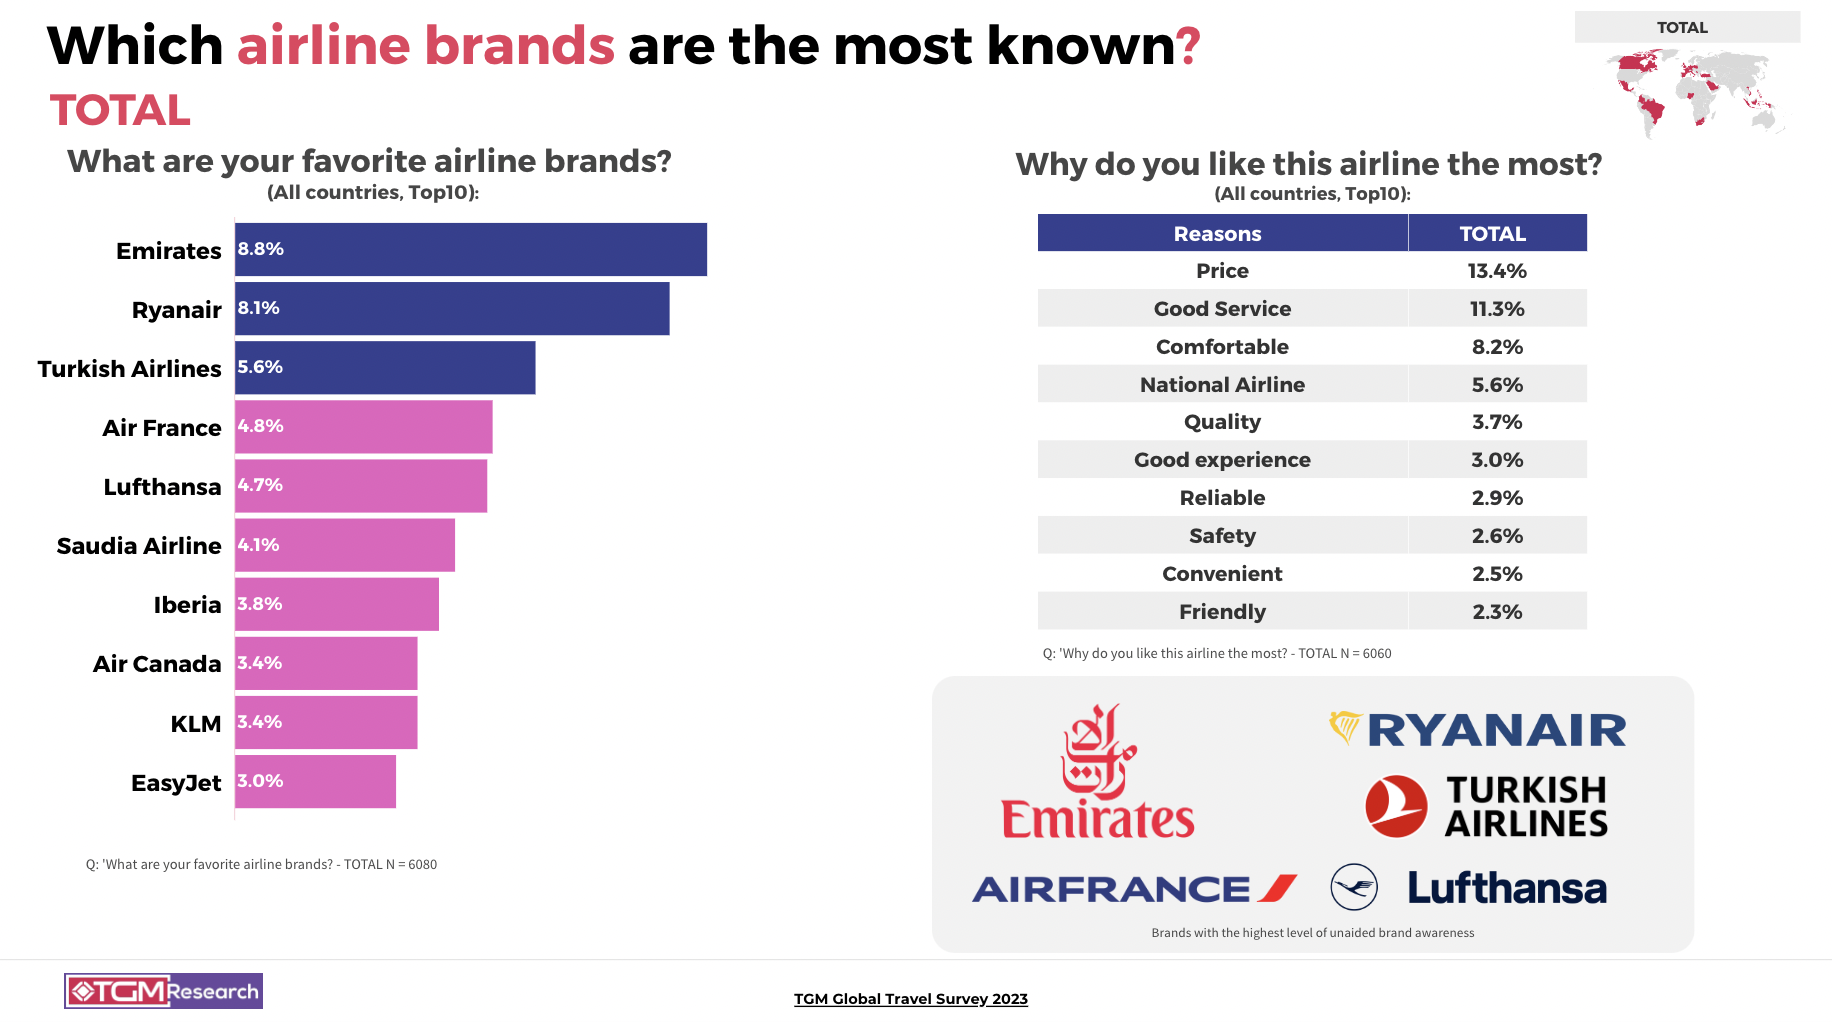 Emirates  and Ryanair stand tall as the two leading airline brands